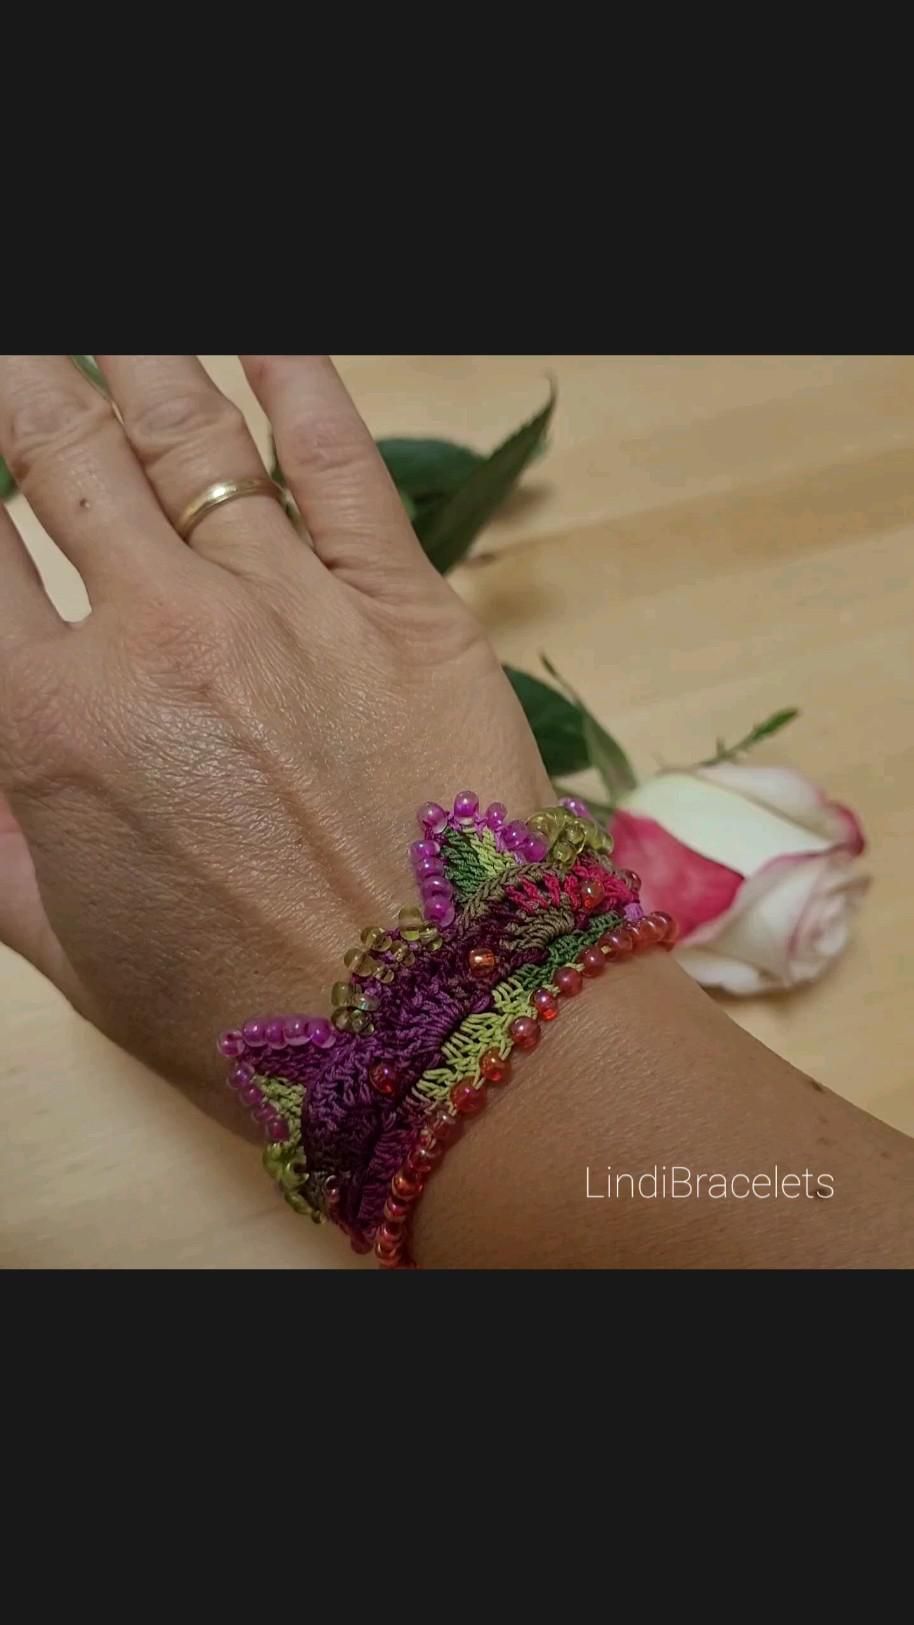 Elegant Beaded Lace Bracelet Cuff: A Stunning Accessory for Any Occasion